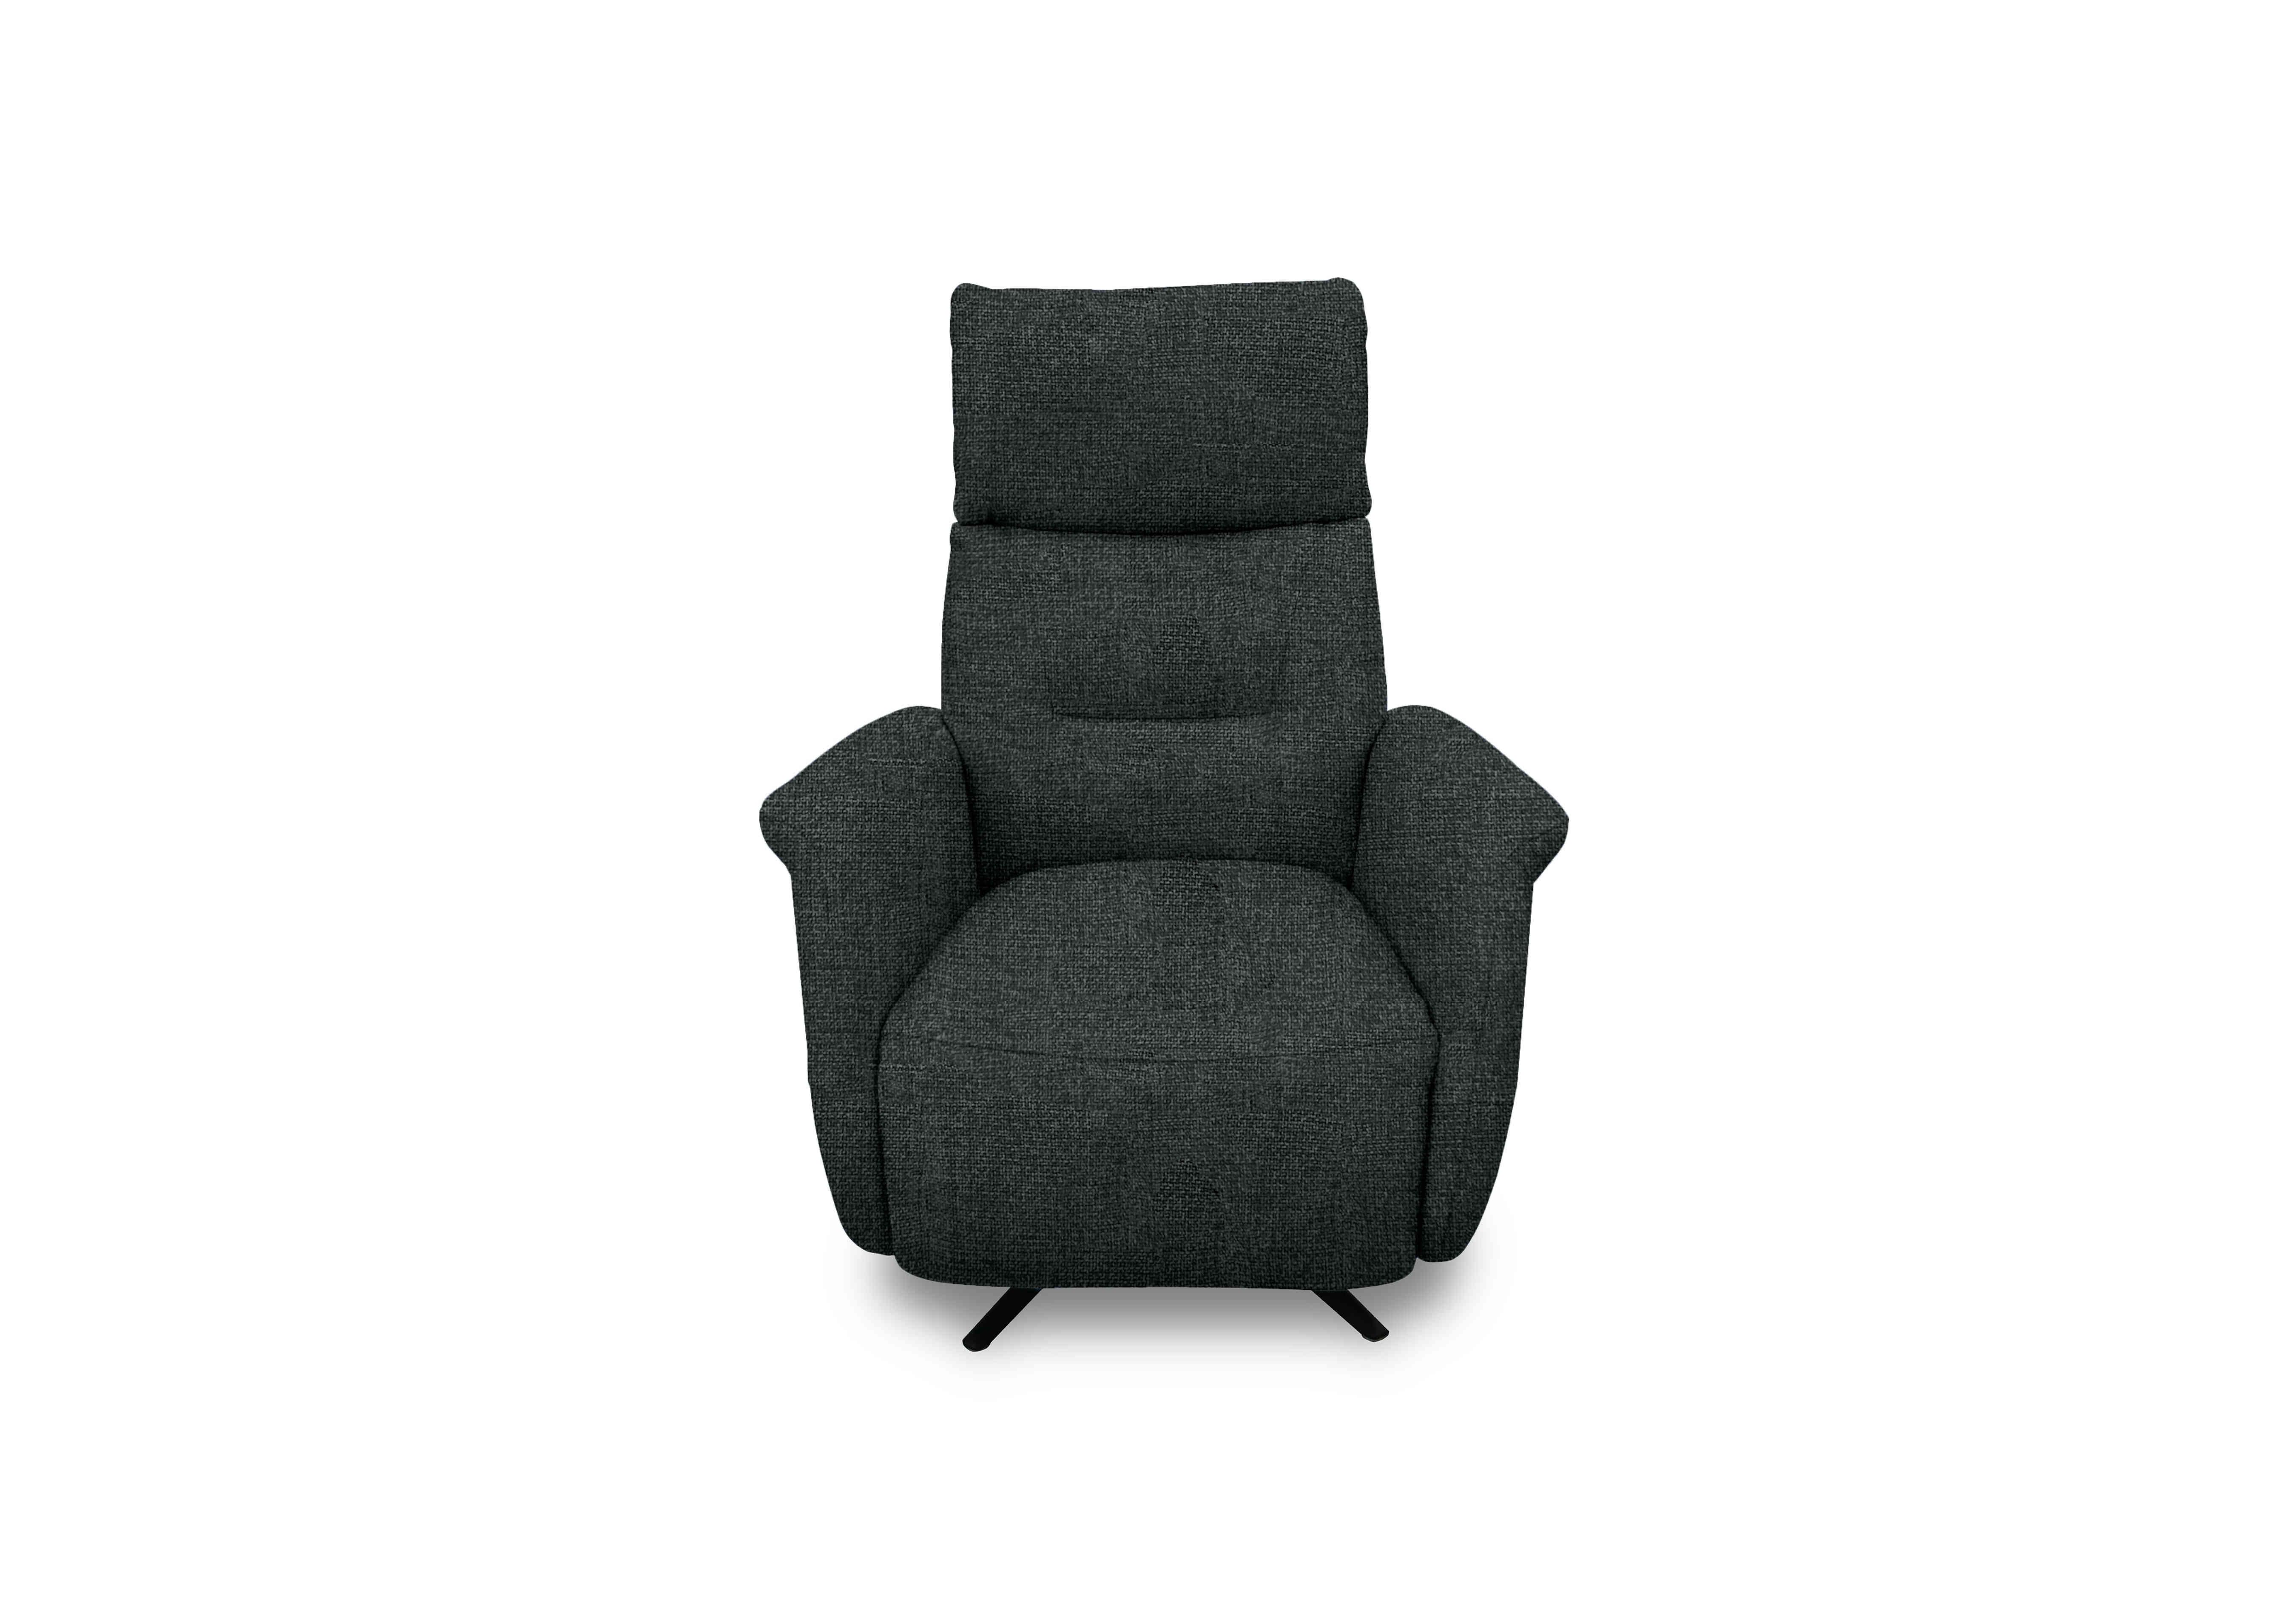 Designer Chair Collection Dusseldorf Fabric Power Recliner Swivel Chair in Fab-Cac-R463 Black Mica on Furniture Village